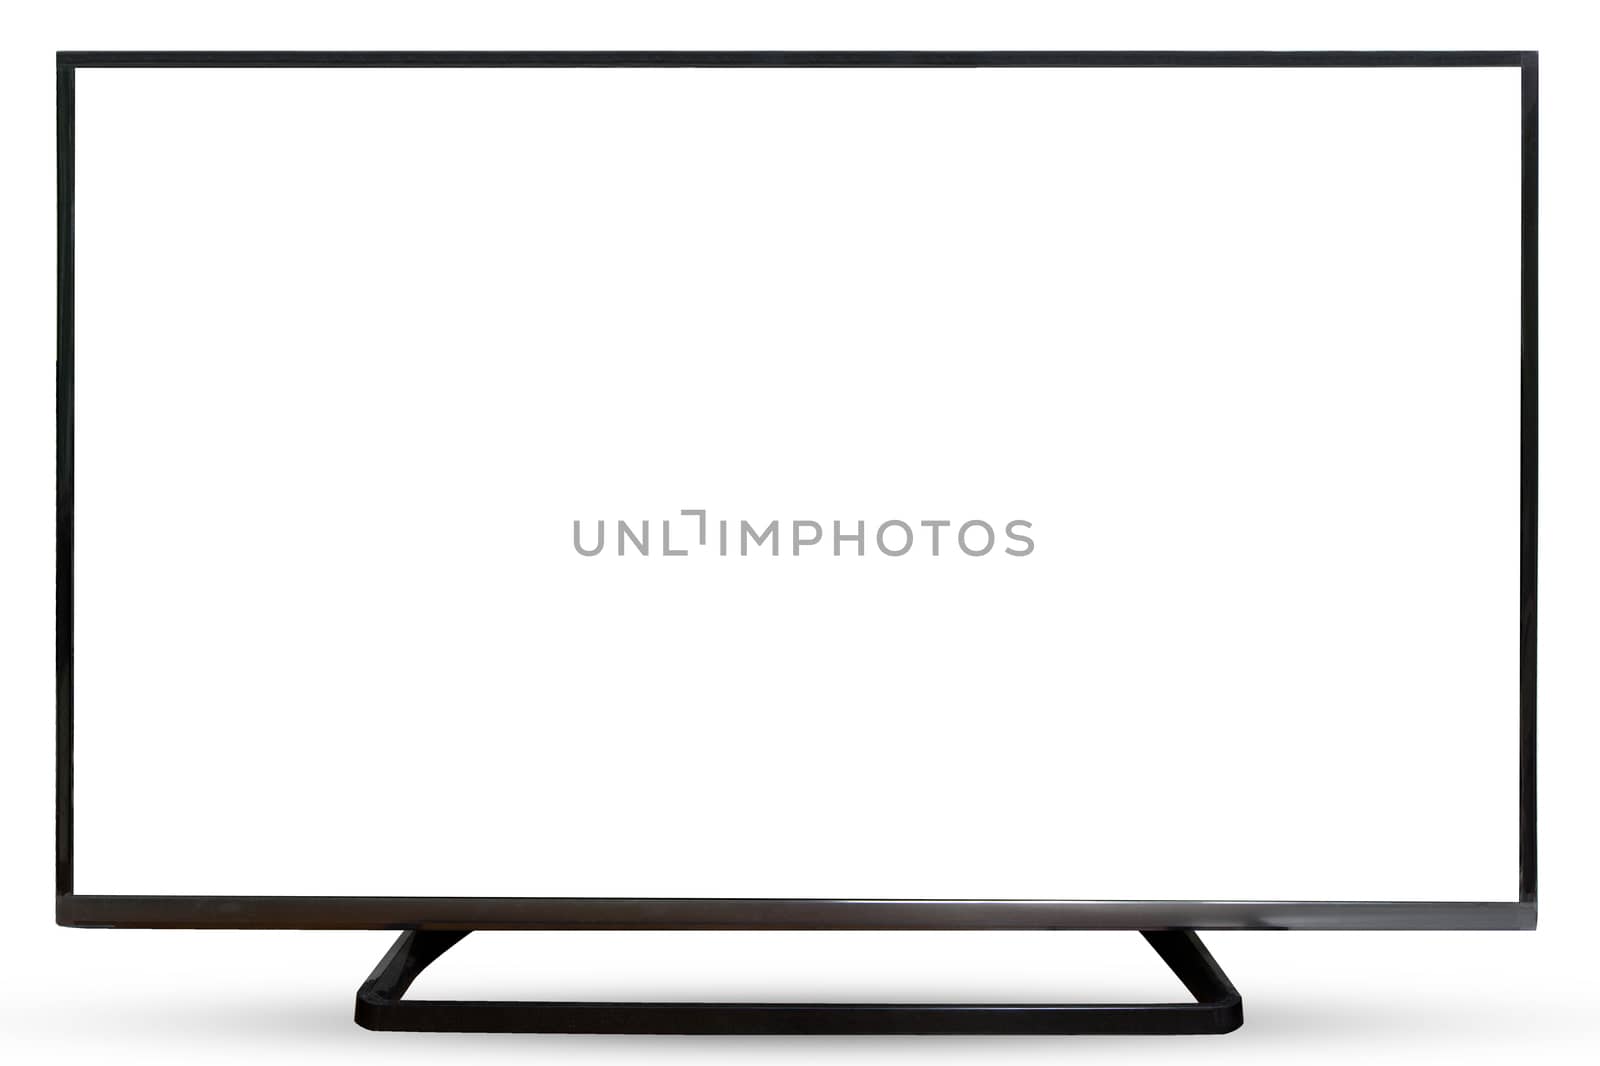 Television sky or monitor PC landscape isolated on white backgro by jayzynism